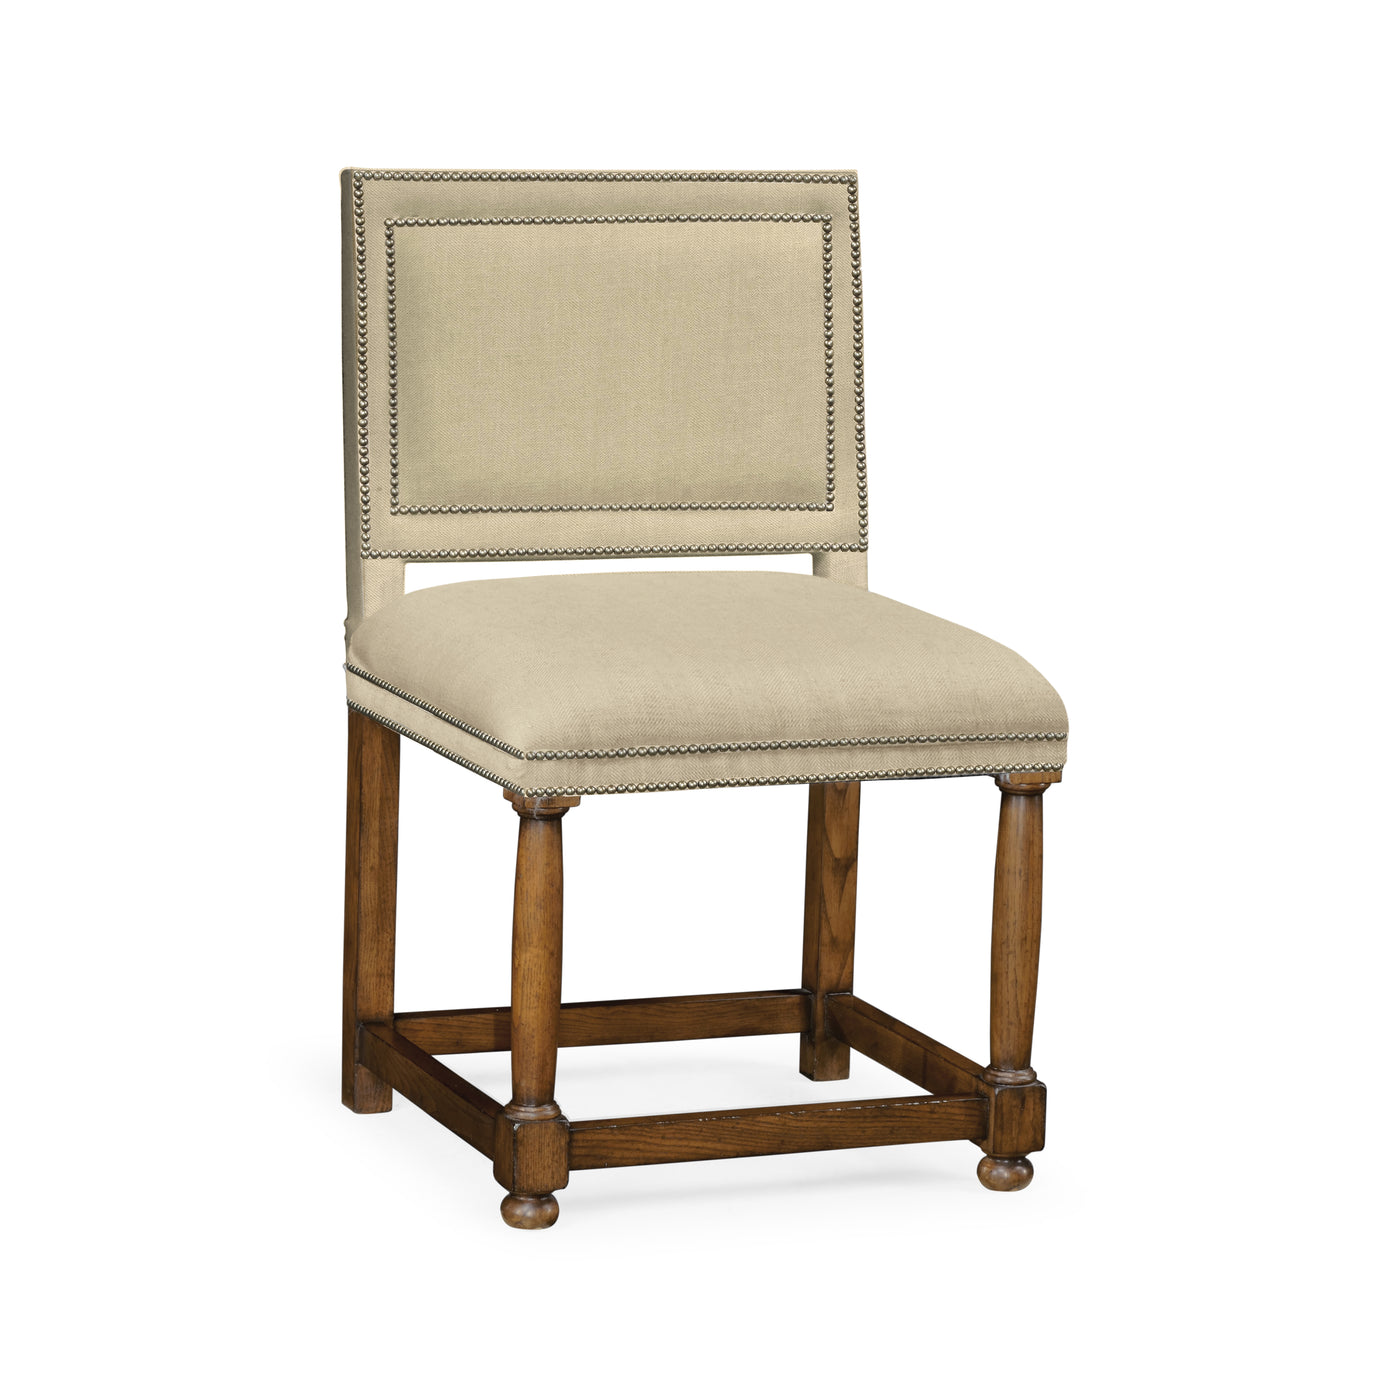 Traditional Accents Louise XIII Warm Chestnut Chair